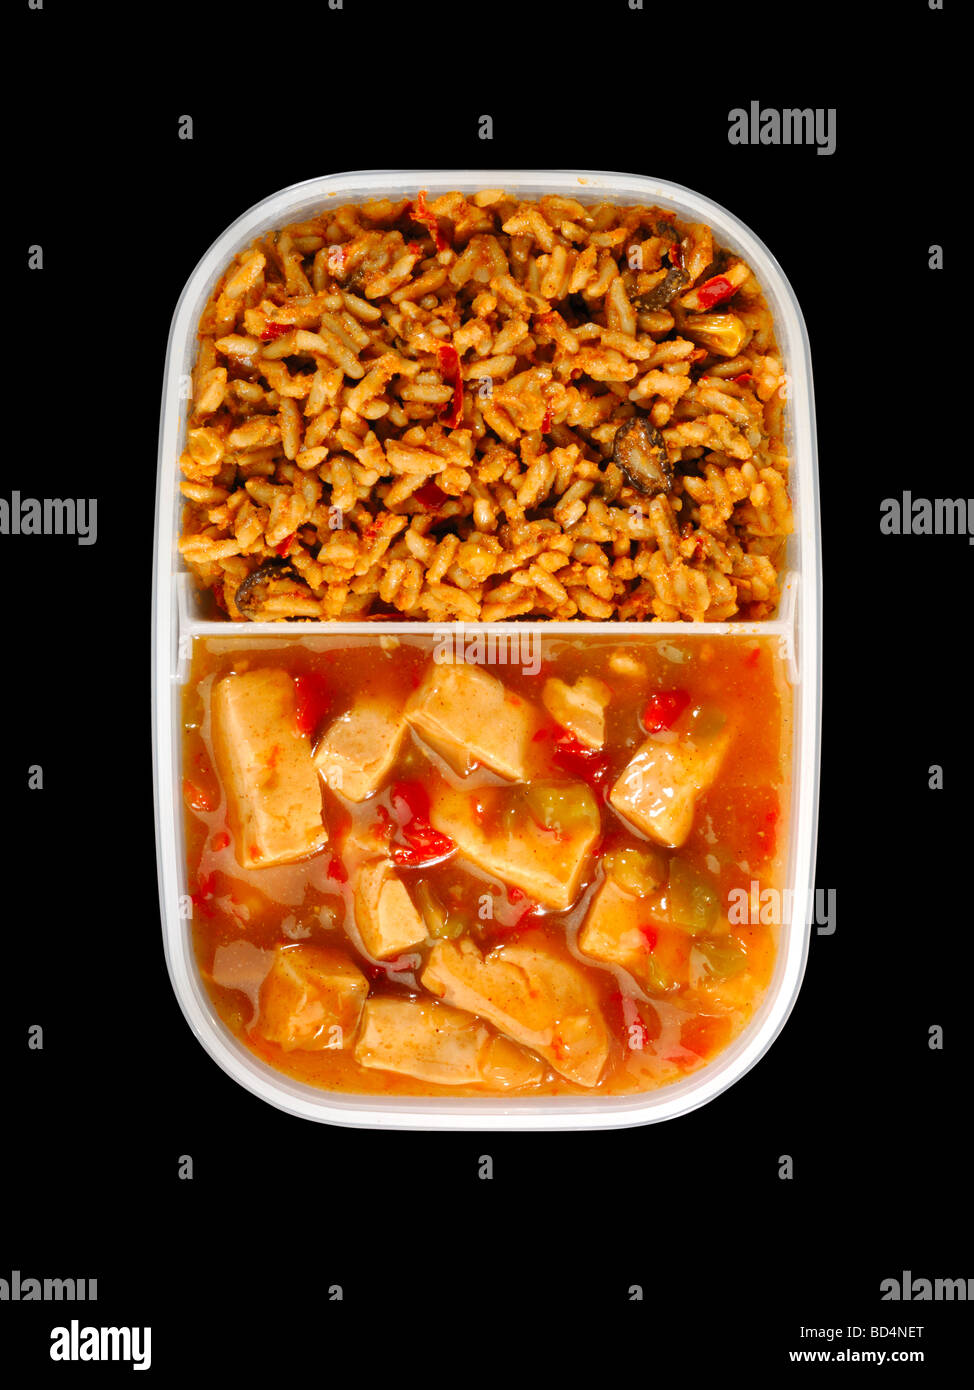 A plastic container with military food rations spicy chicken with fried rice Stock Photo